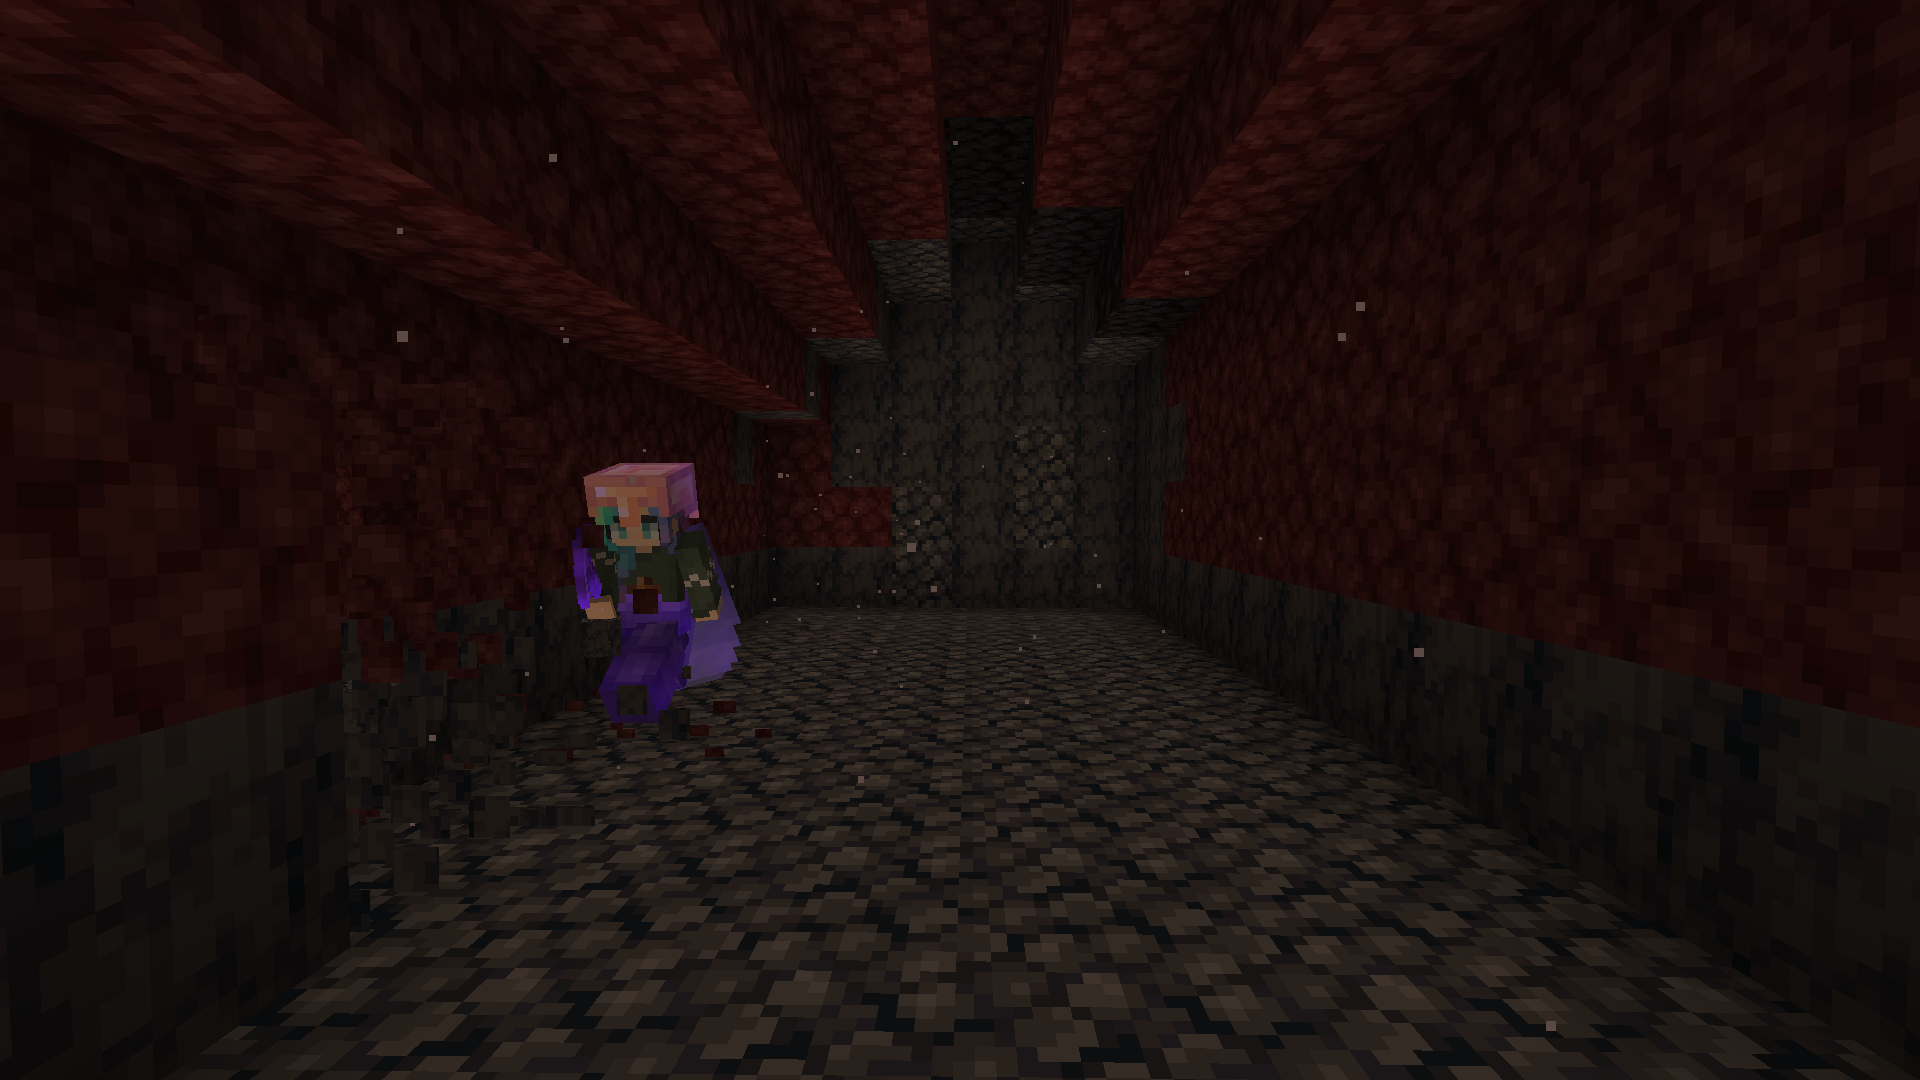 Digging through the nether